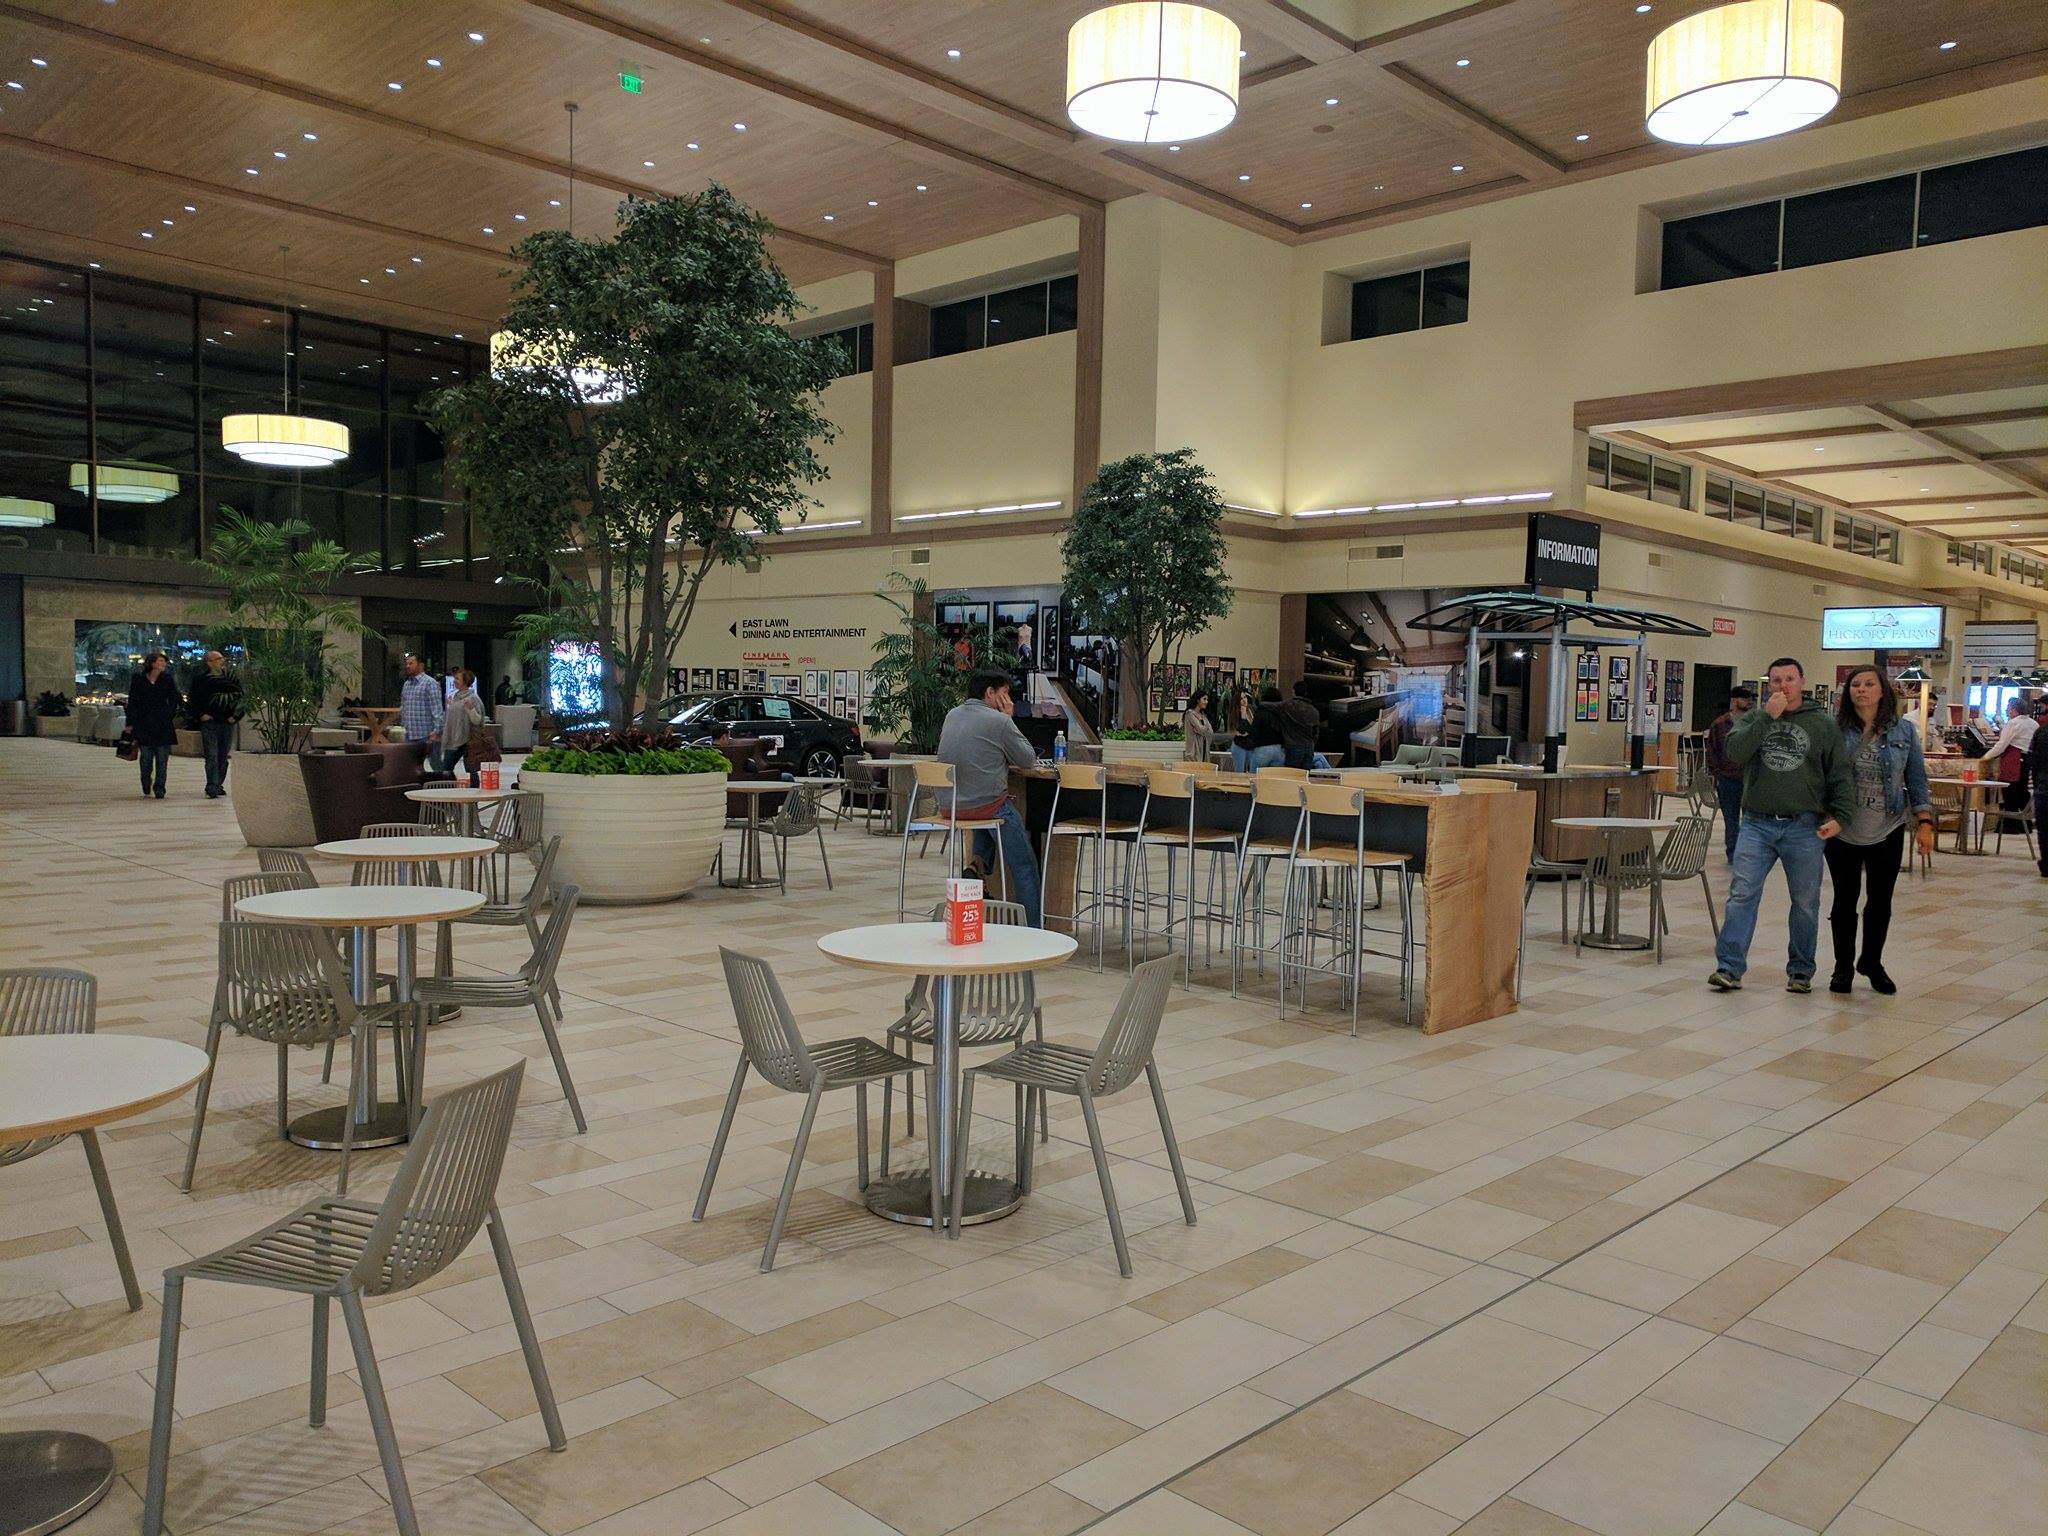 Nightlife Foothills Mall the new hangout spot The Rocky Mountain